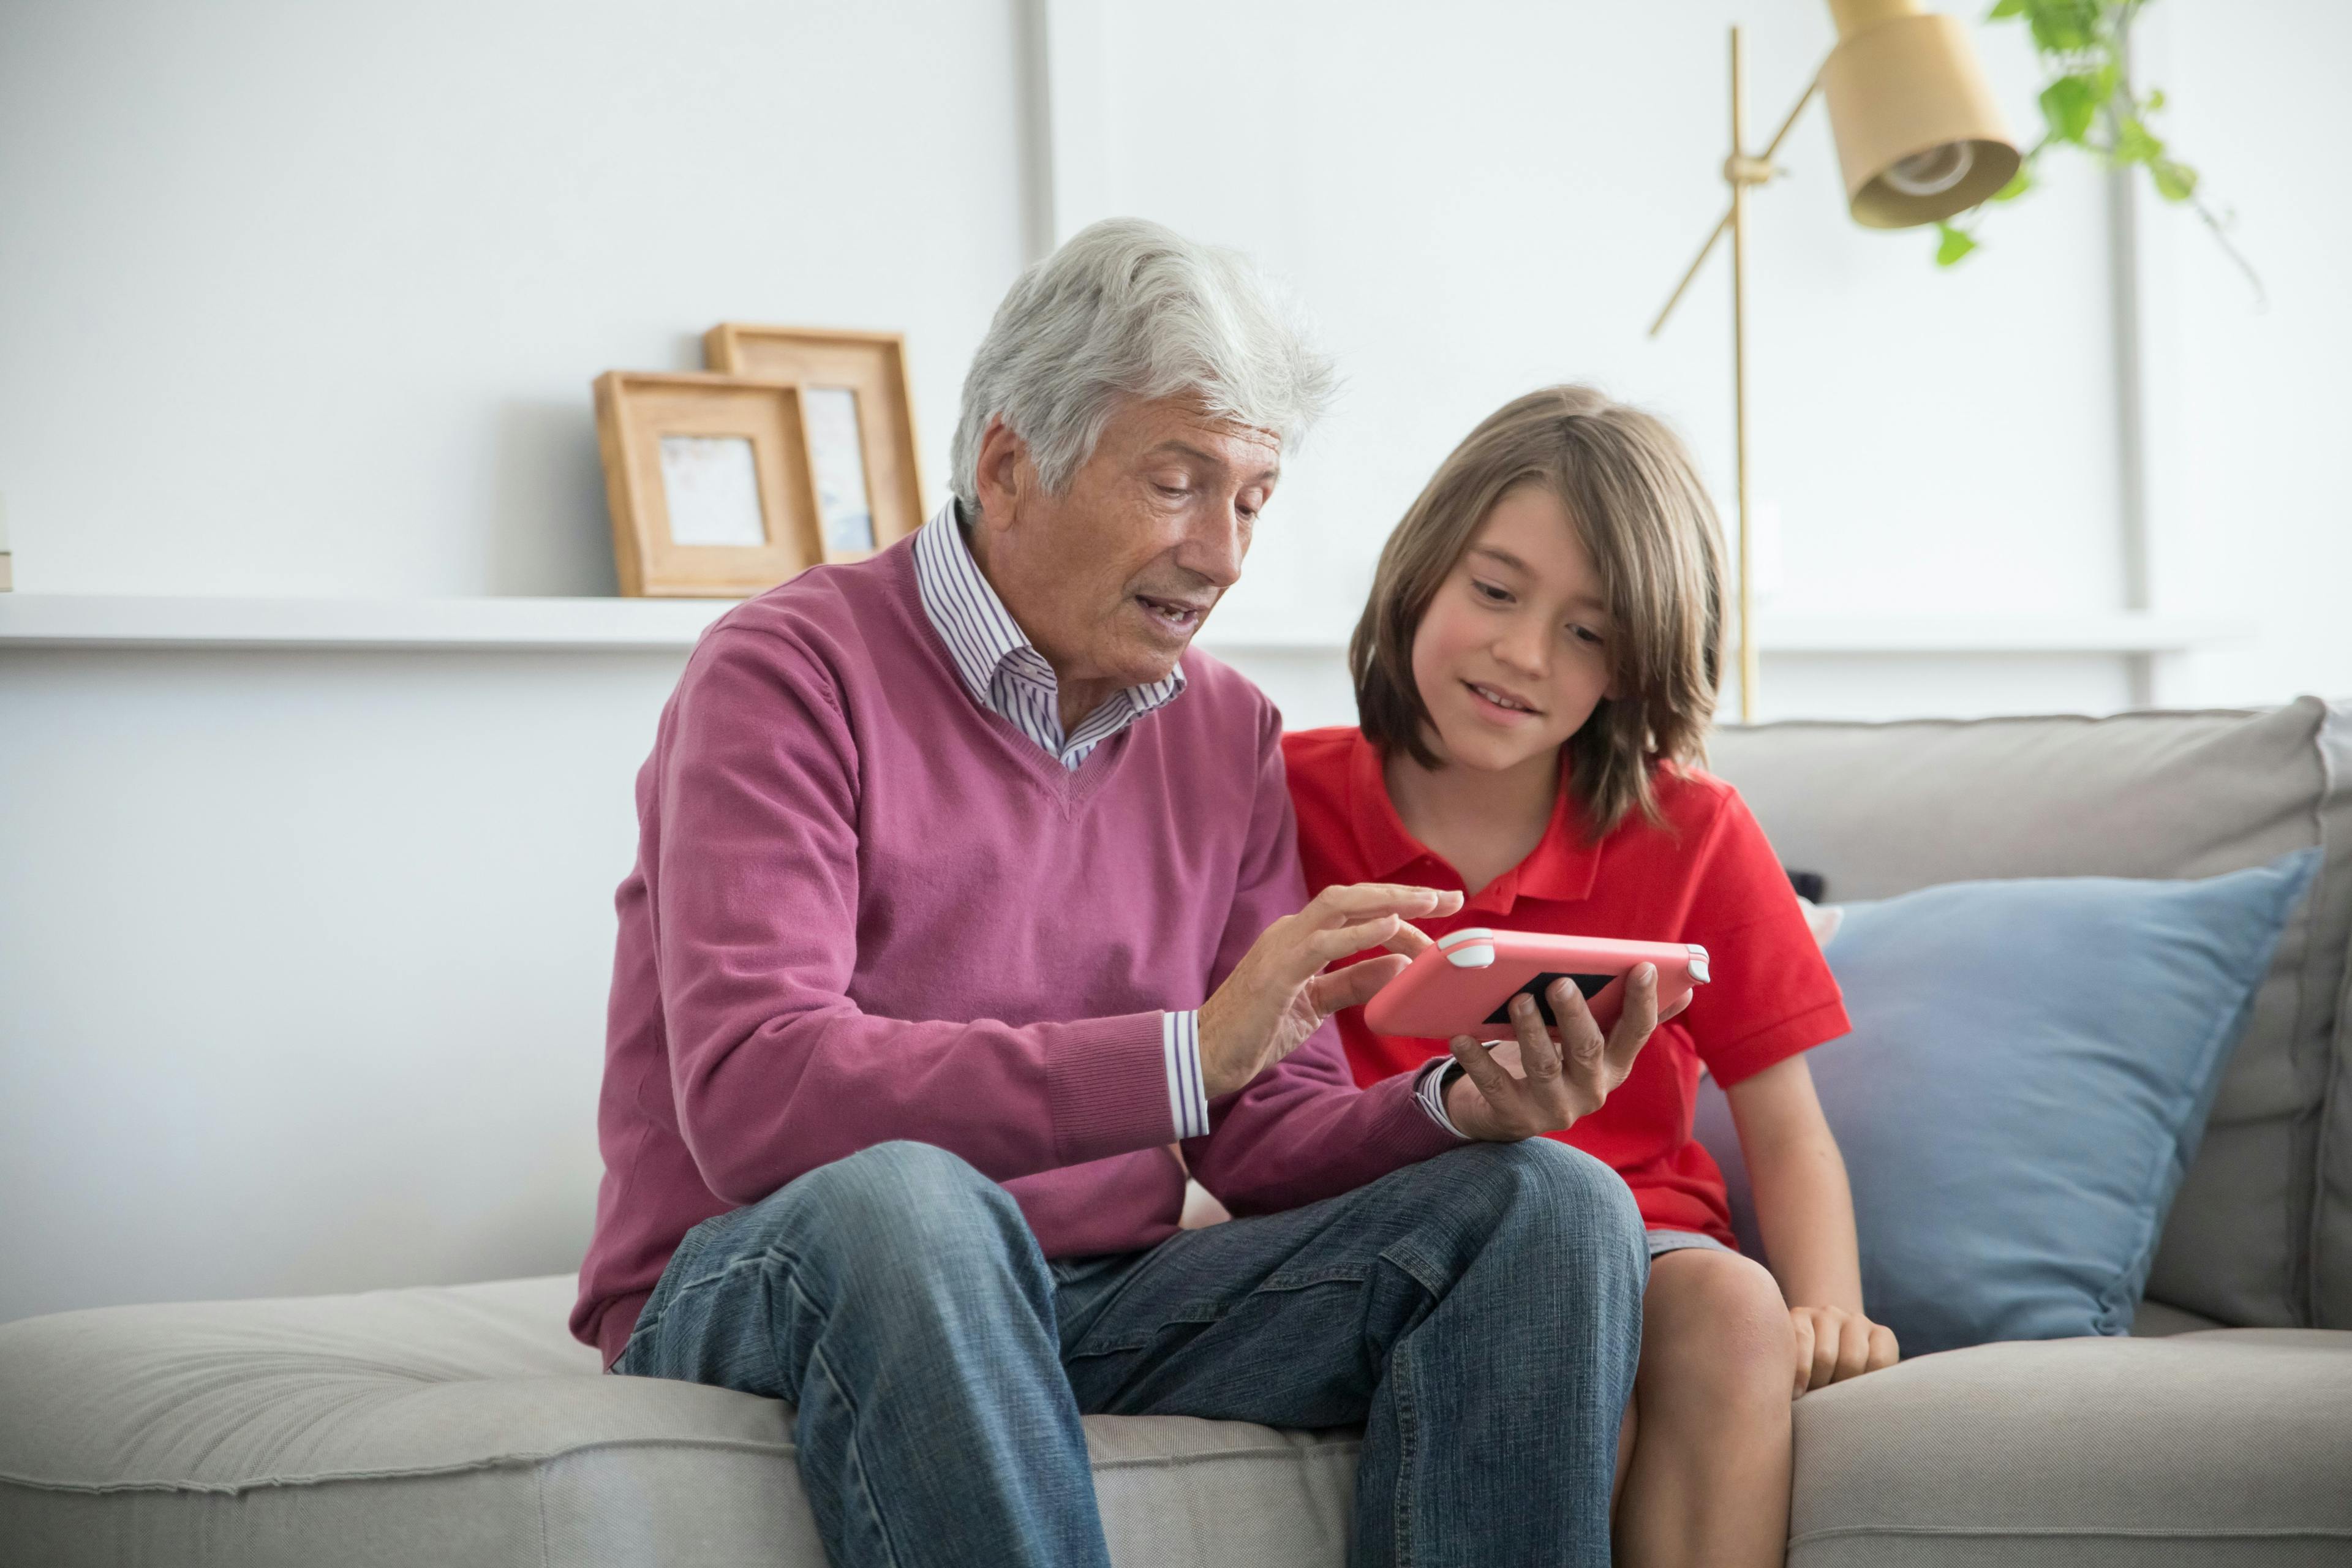 We've created a list of 10 games and activities for adults with Alzheimer's or dementia. The key to all the games on this list is that you can't perform them incorrectly, which will give your loved one a sense of success and satisfaction.